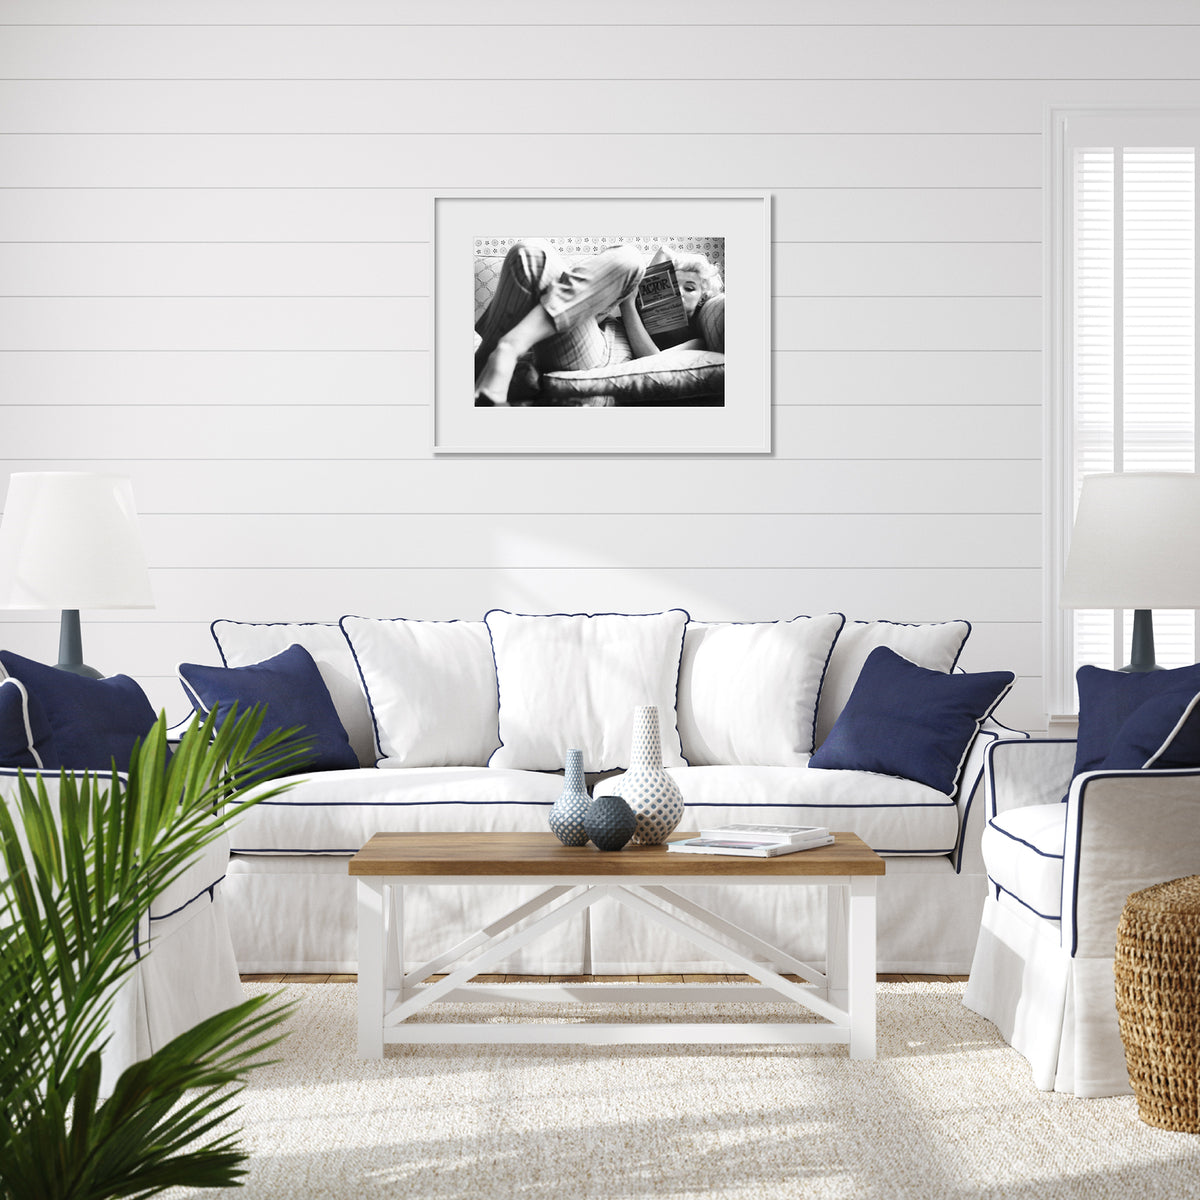 Framed: Marilyn Candid Moment by Ed Feingersh photo for sale Getty Images Gallery